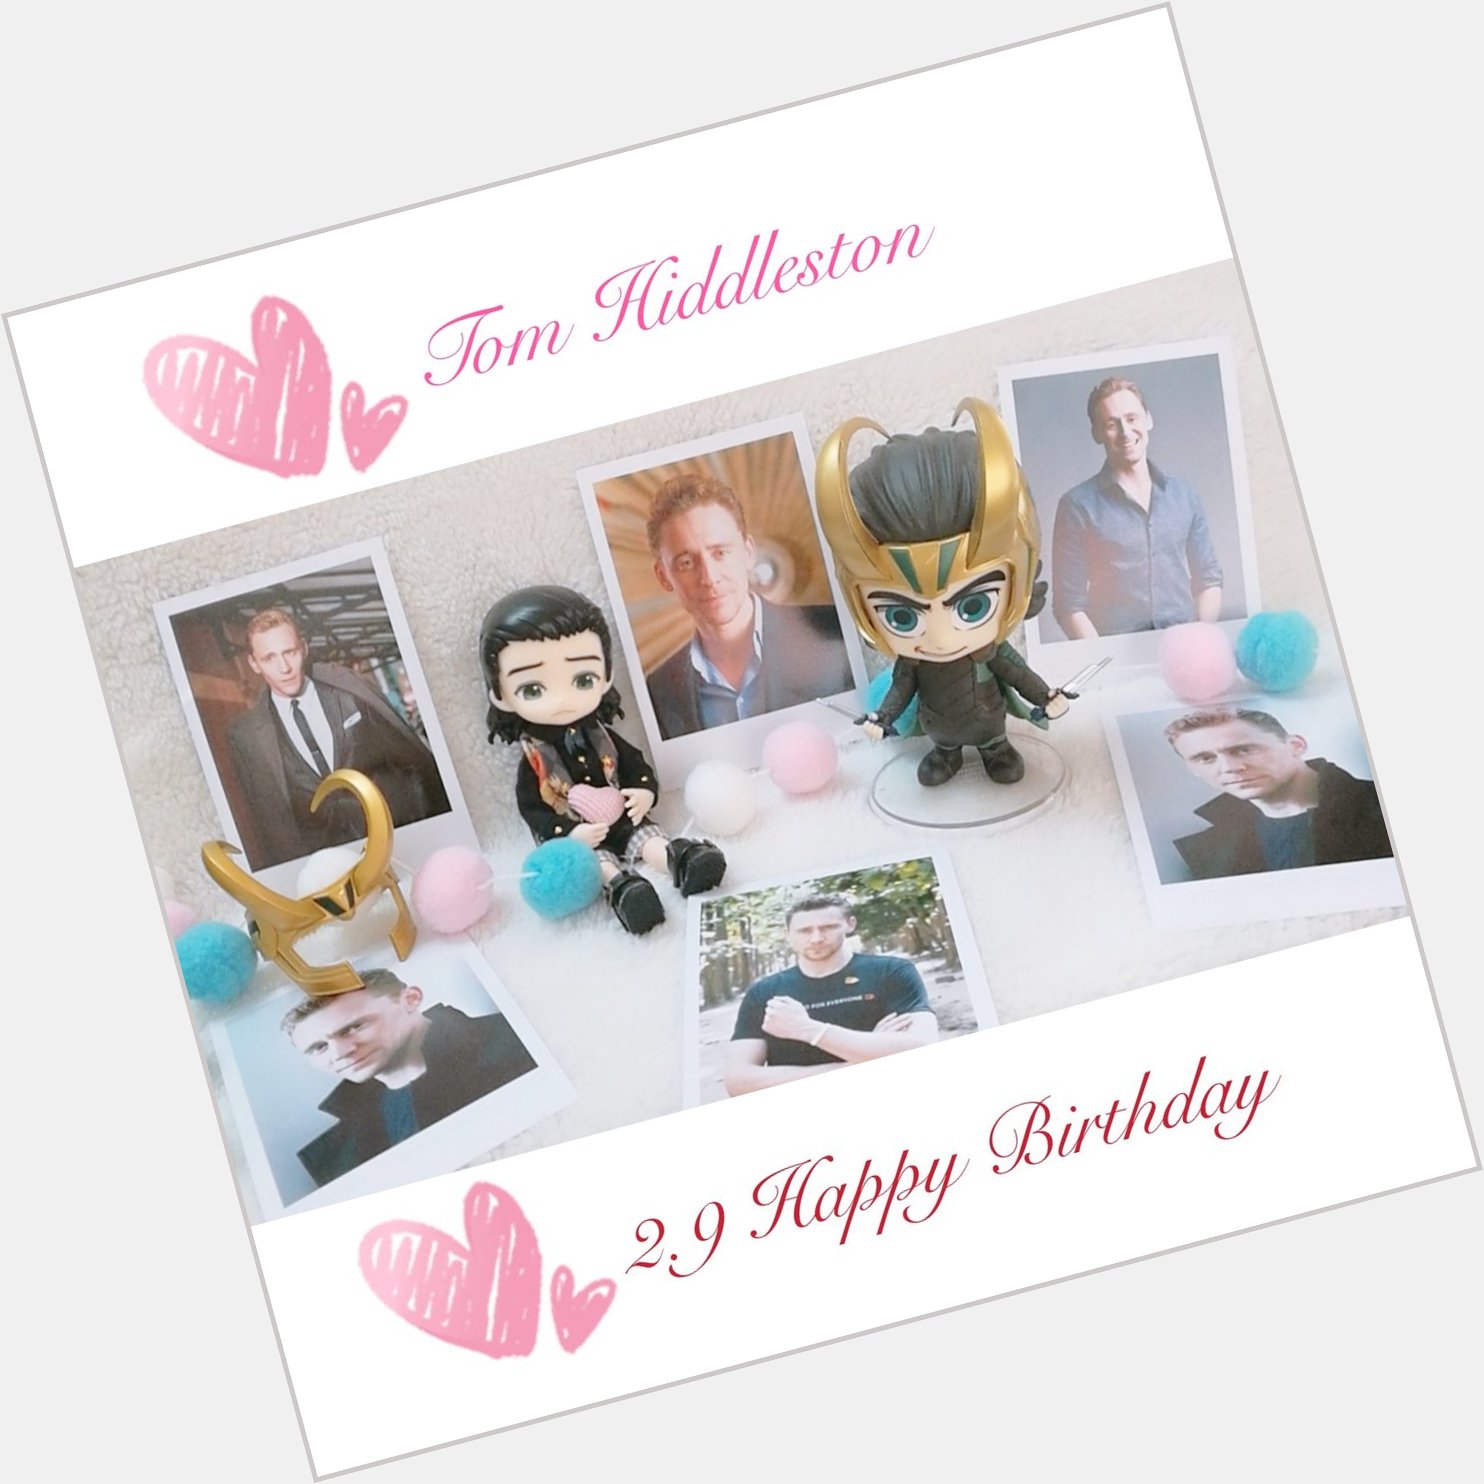  0209 Tom Hiddleston Happy Birthday You are the little prince forever         